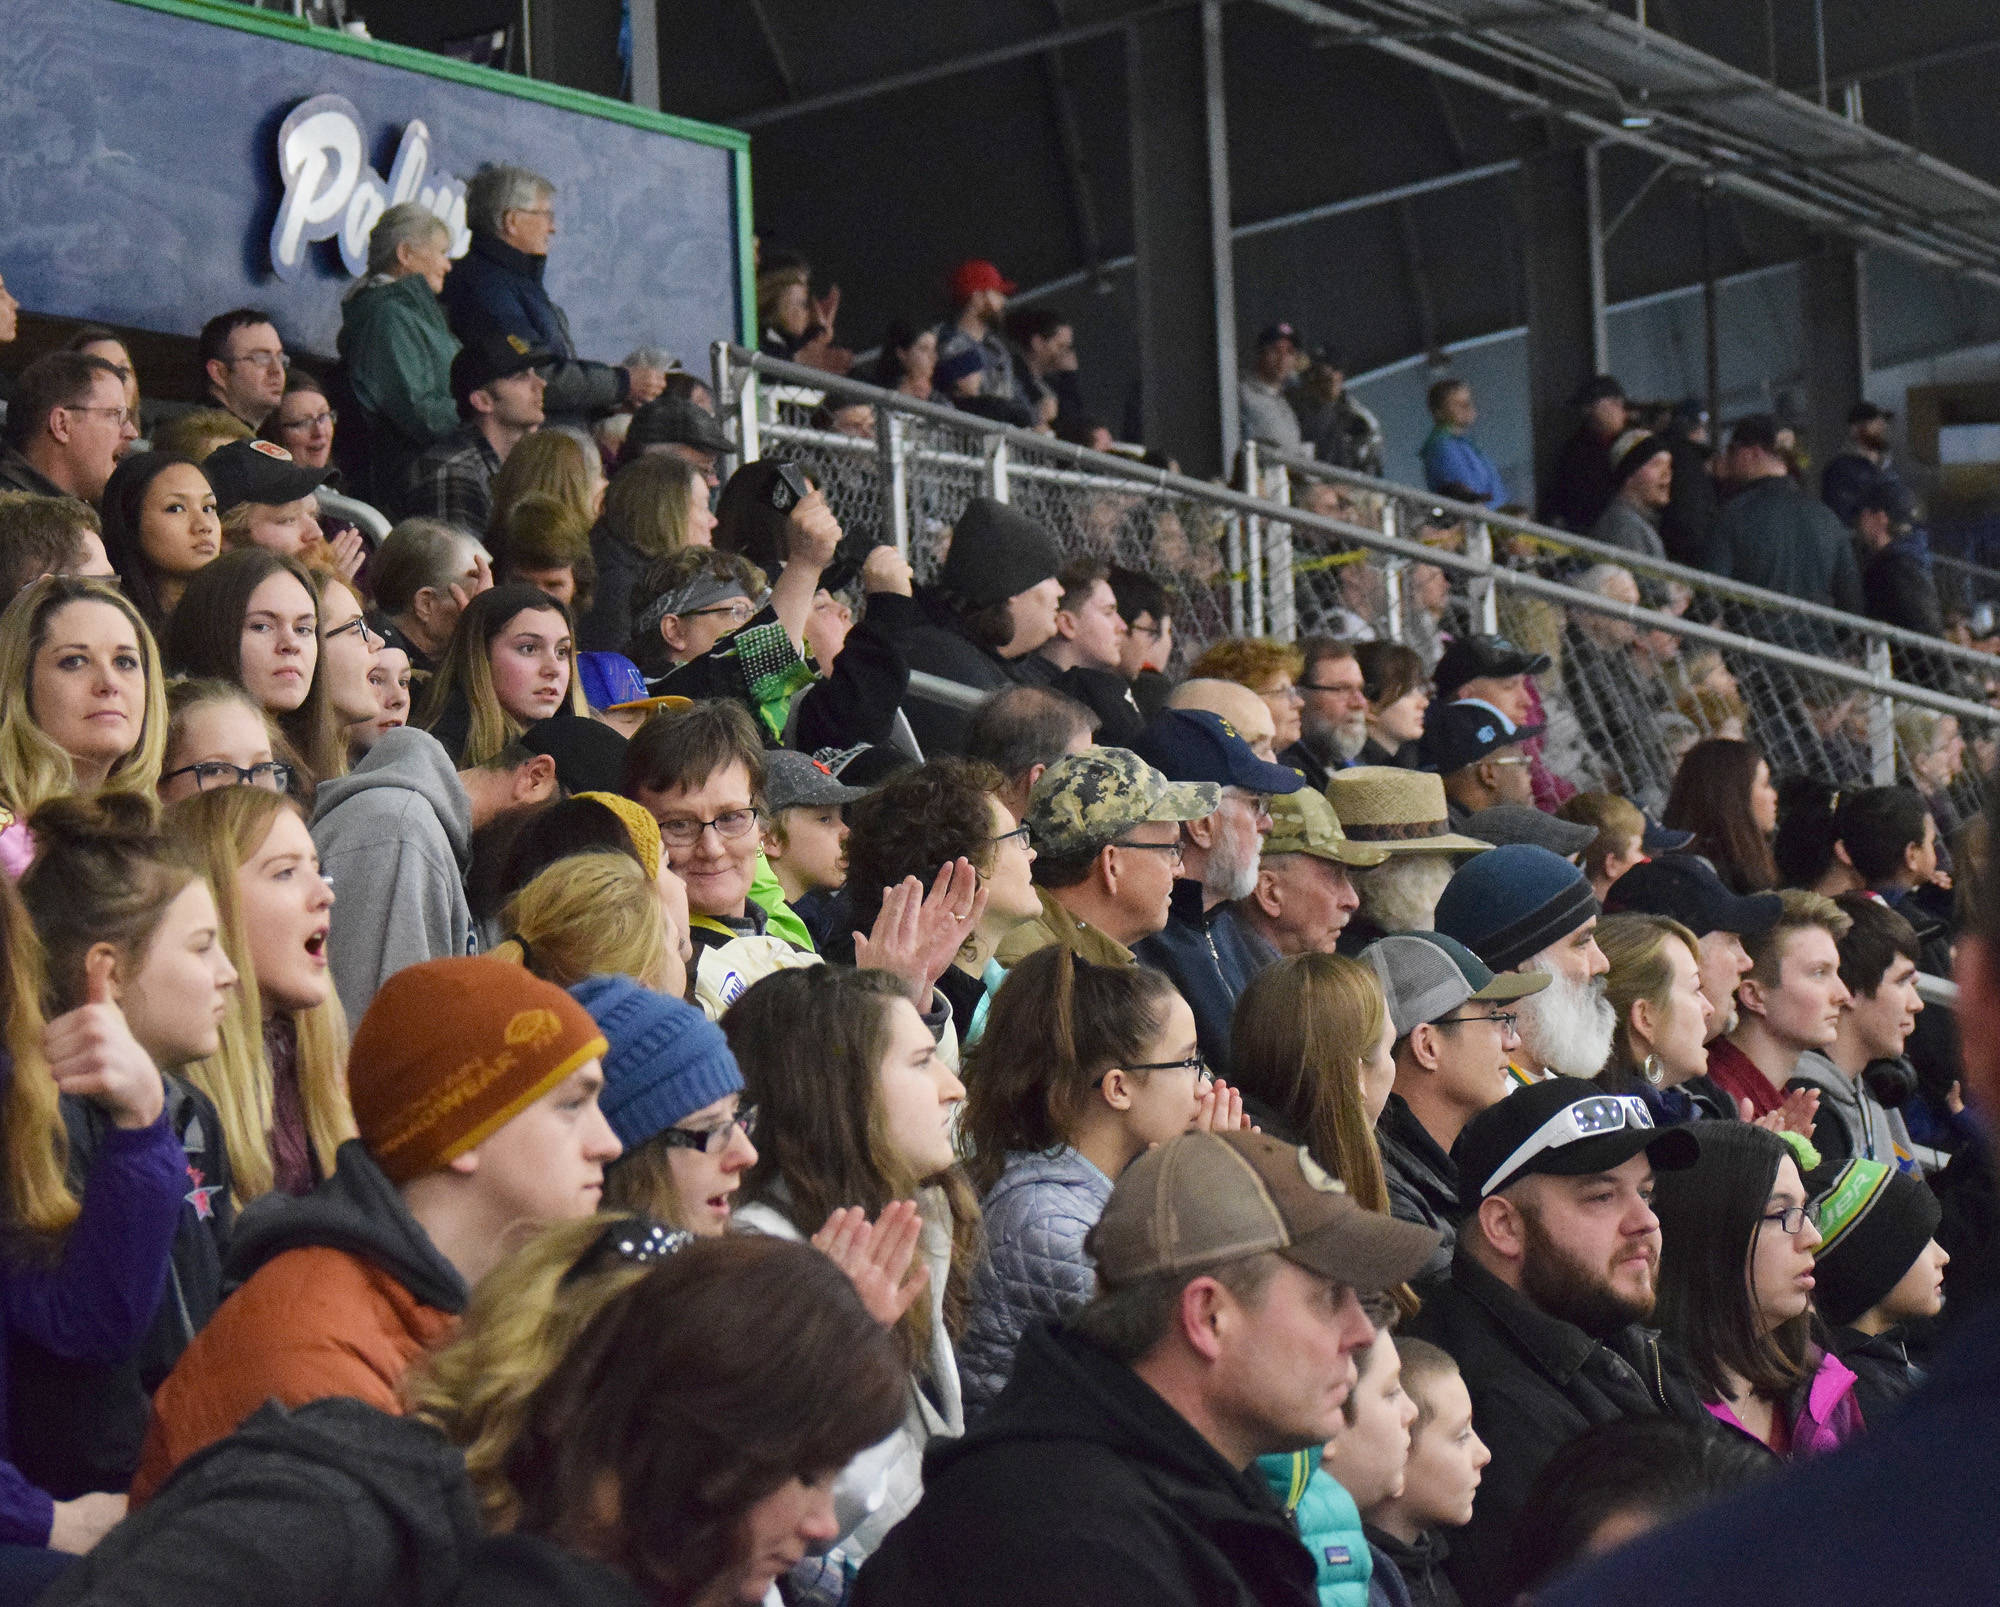 A capacity enjoys a North American Hockey League contest Friday night between the Kenai River Brown Bears and the Fairbanks Ice Dogs at the MTA Events Center in Palmer. (Photo by Joey Klecka/Peninsula Clarion)